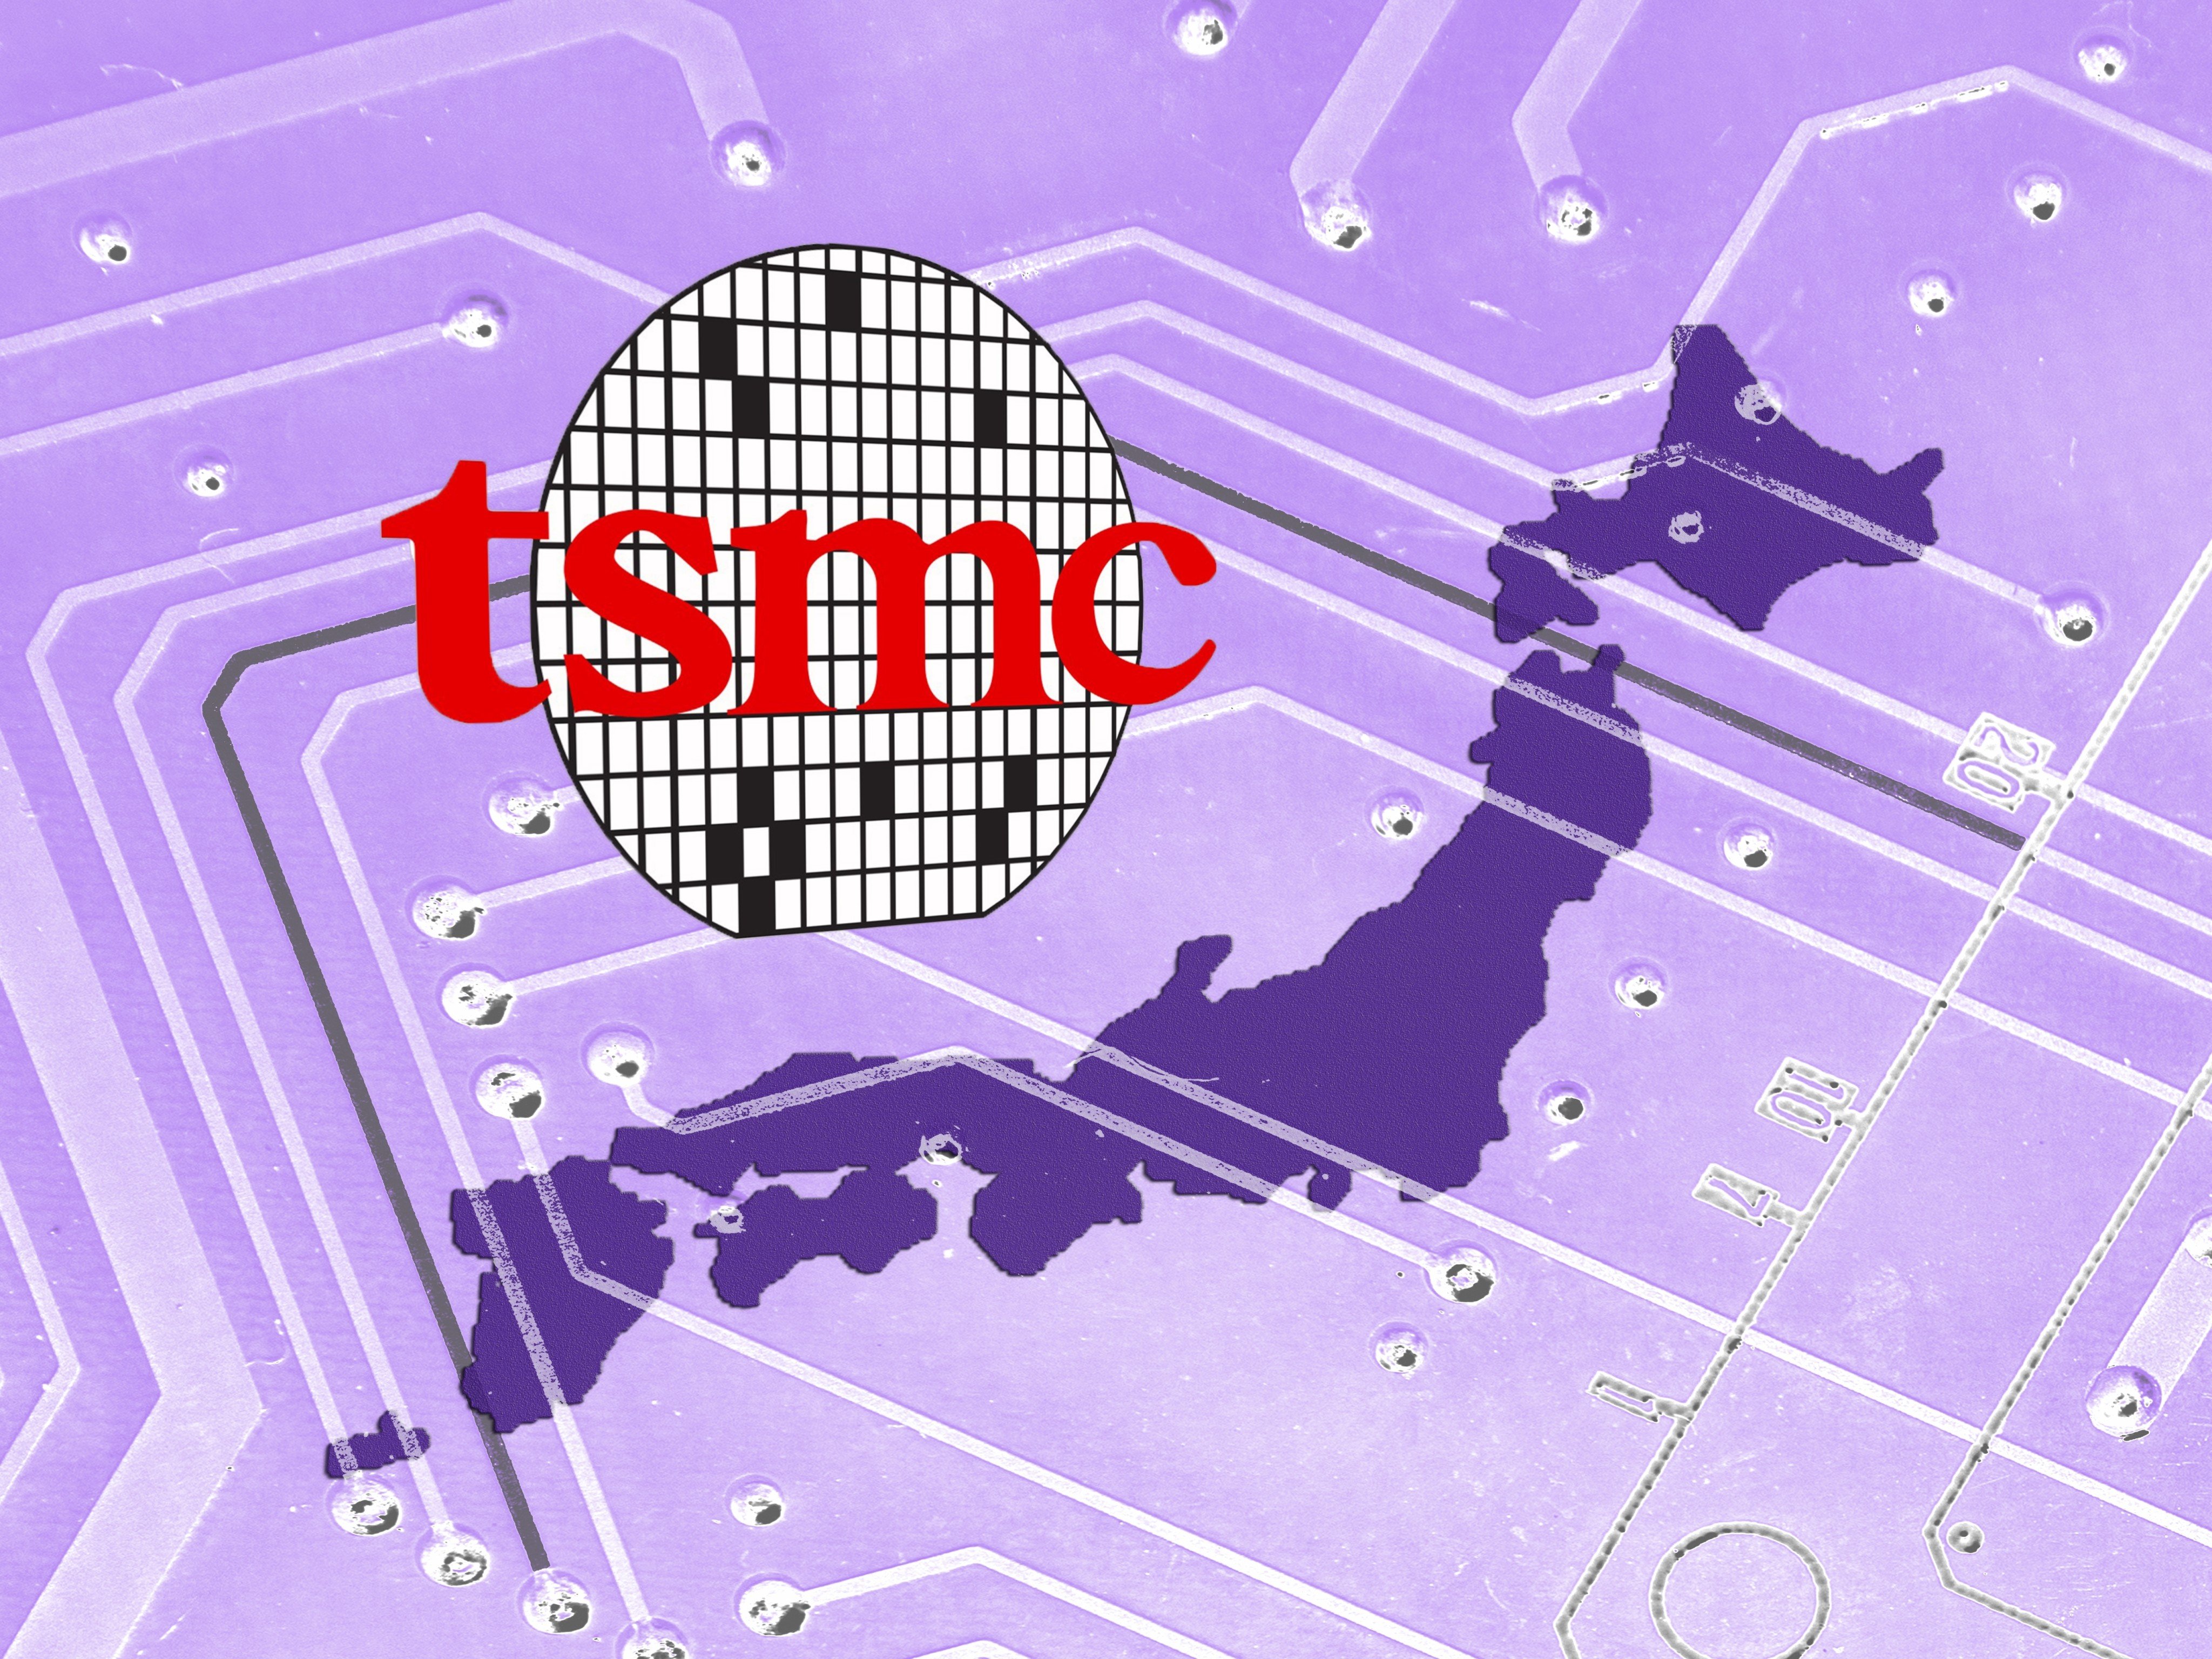 Taiwan Semiconductor Manufacturing Co’s second chip fabrication plant in Japan is scheduled to begin operation by the end of 2027. Image: Shutterstock